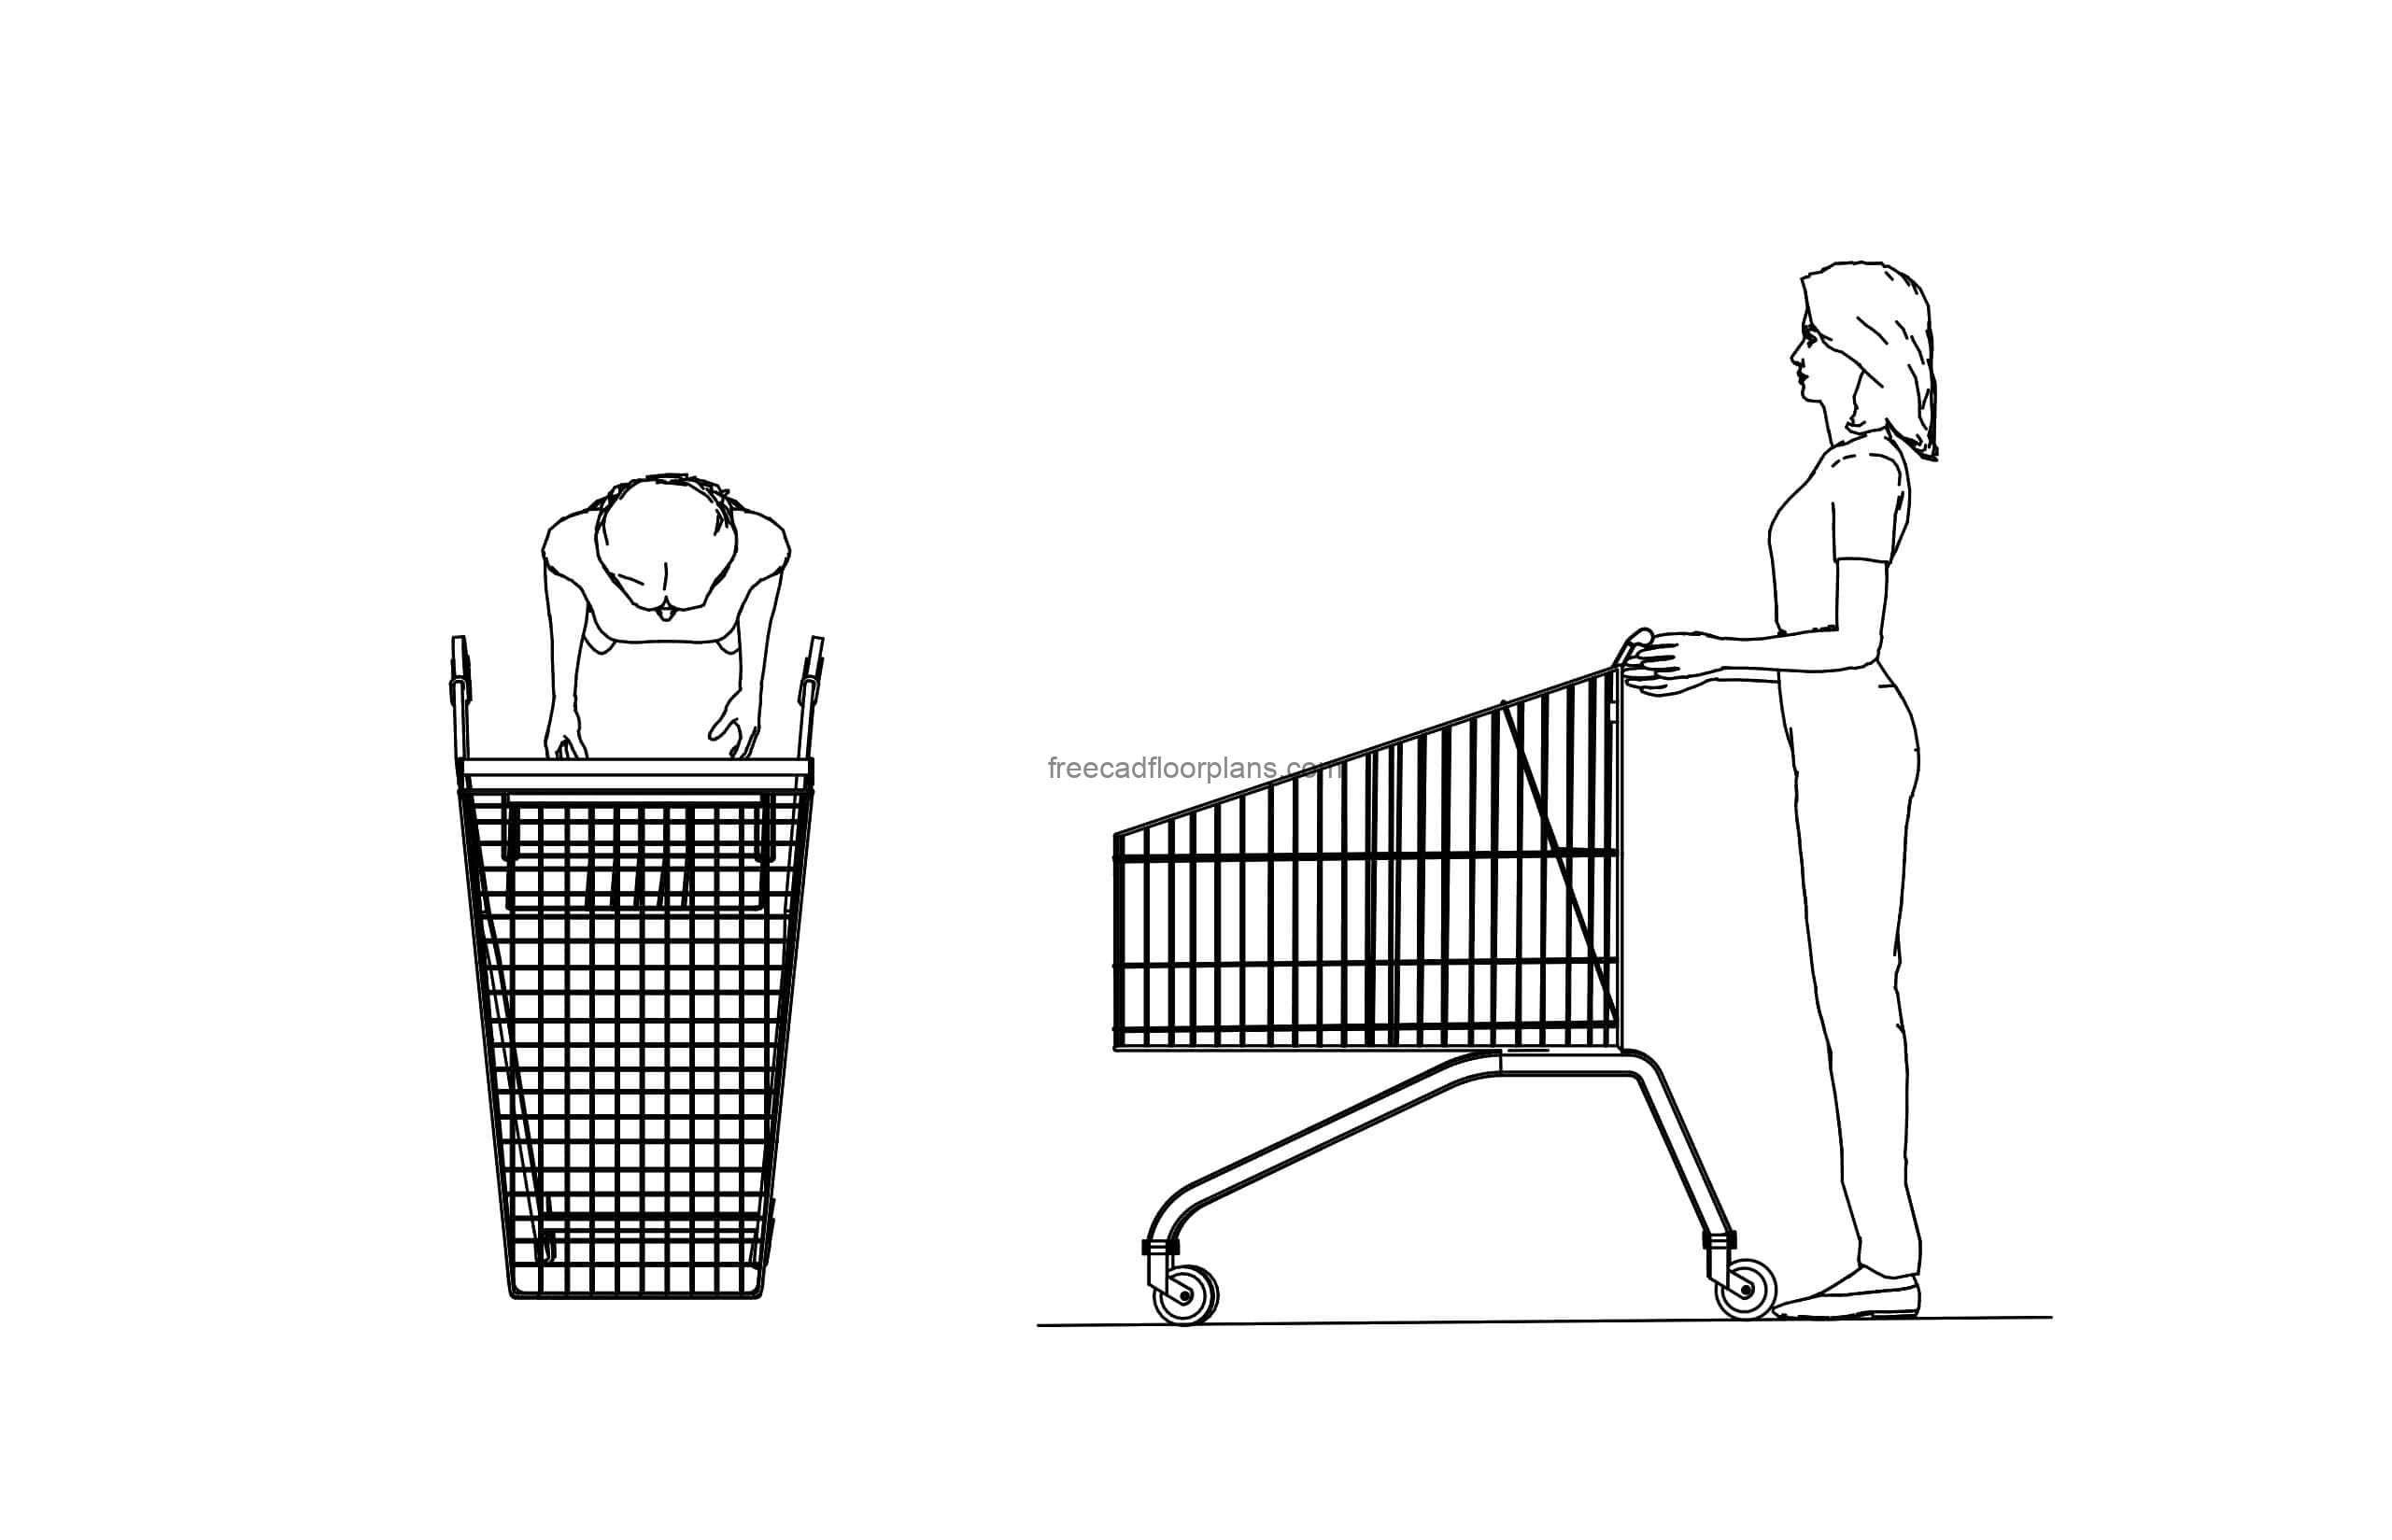 drawing in dwg cad model of an shopping trolley with human figure file for free download all 2d views